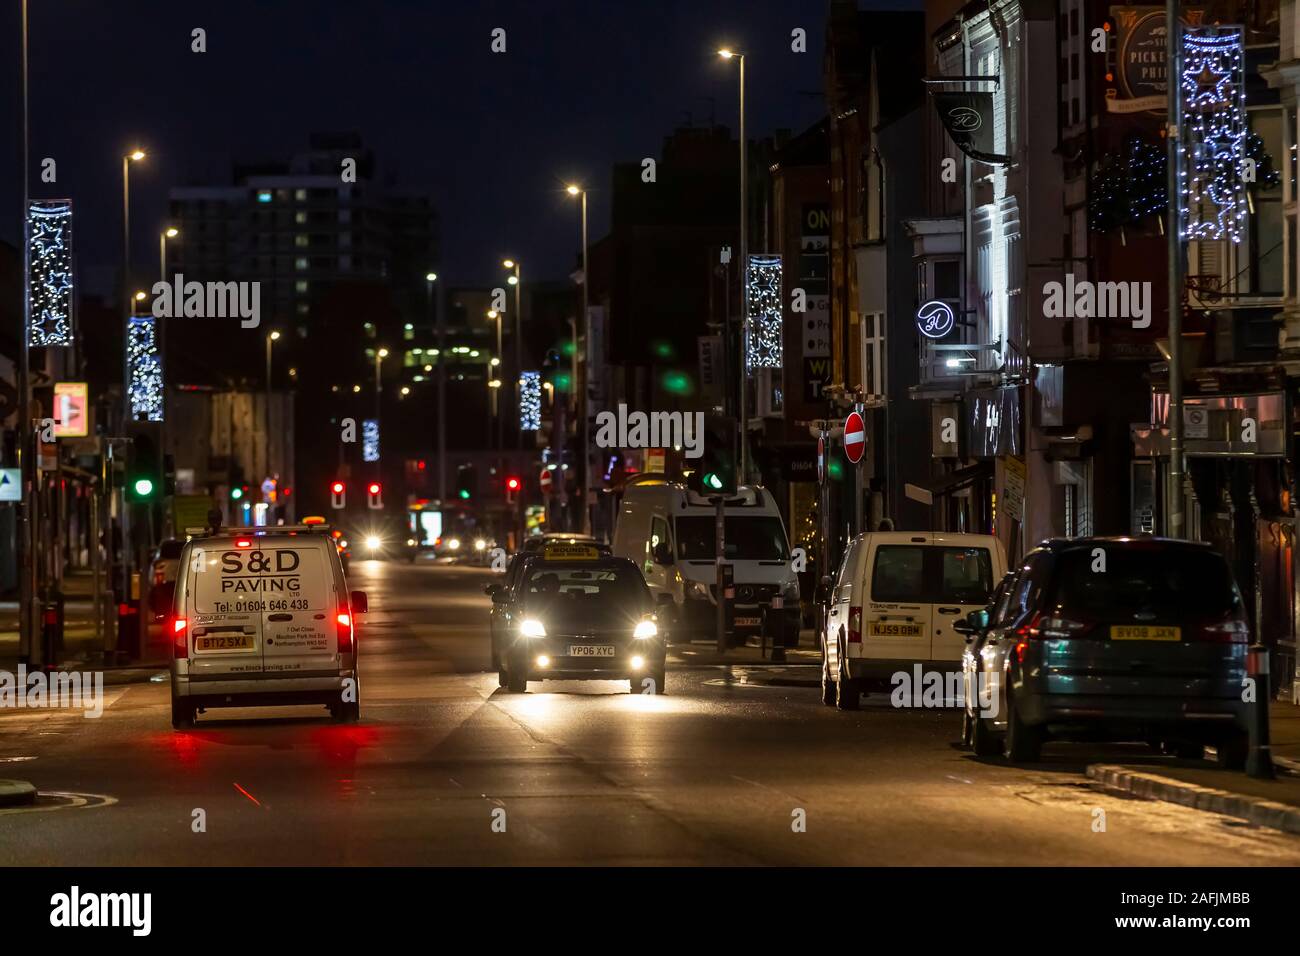 During the hours of darkness on Wellingborough road, Northampton, UK. Stock Photo